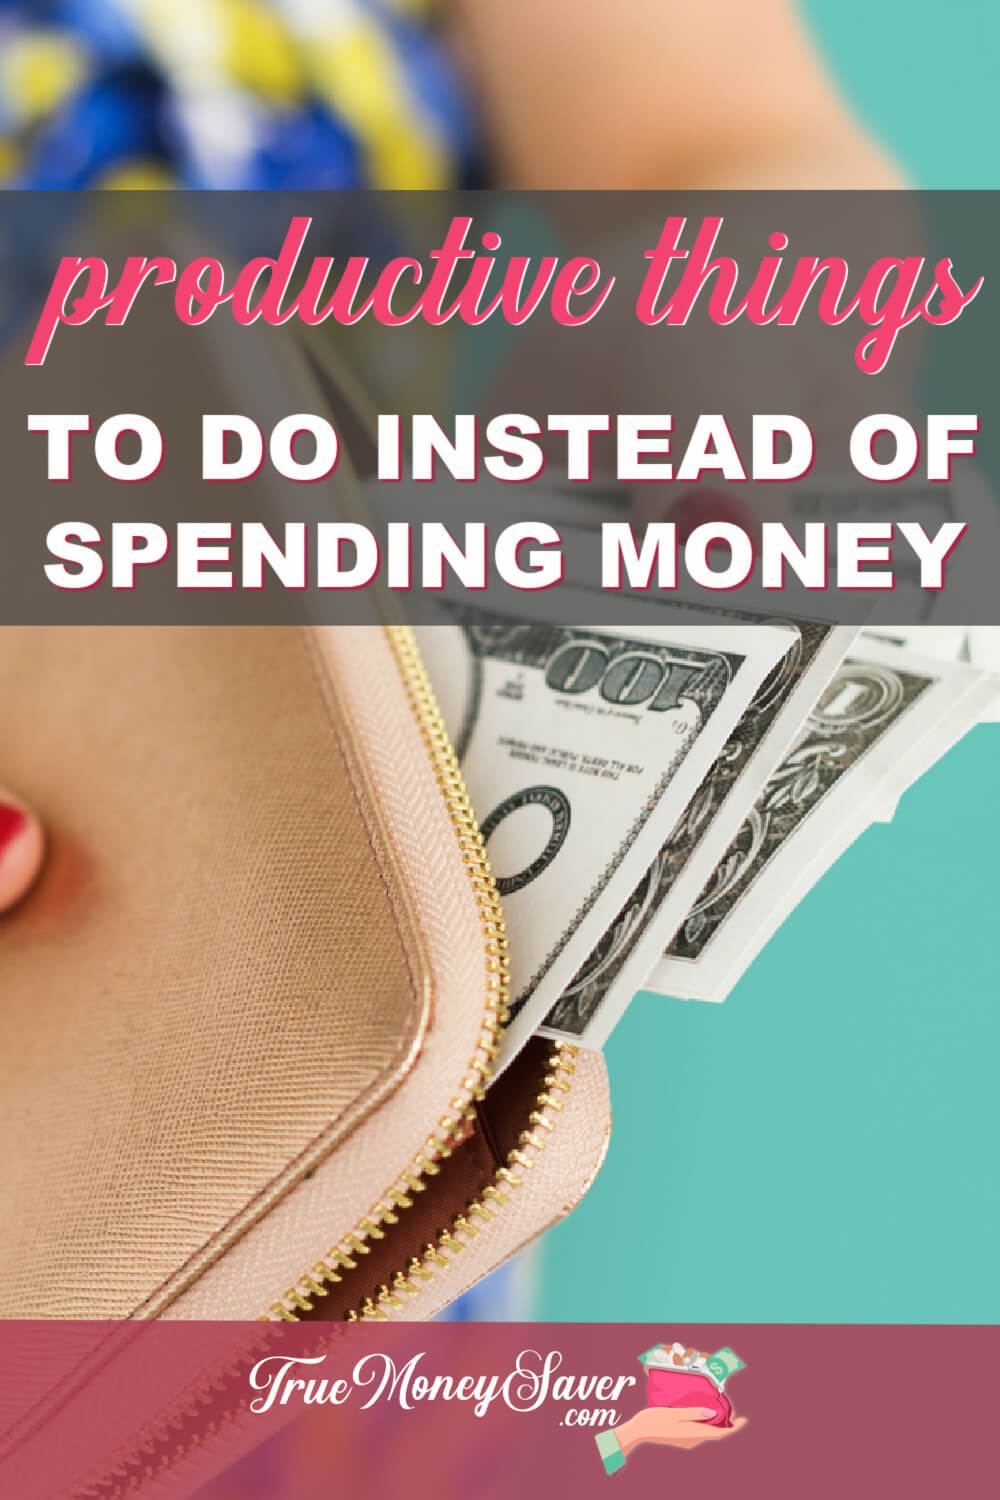 6 Productive Things To Do Instead Of Spending Money